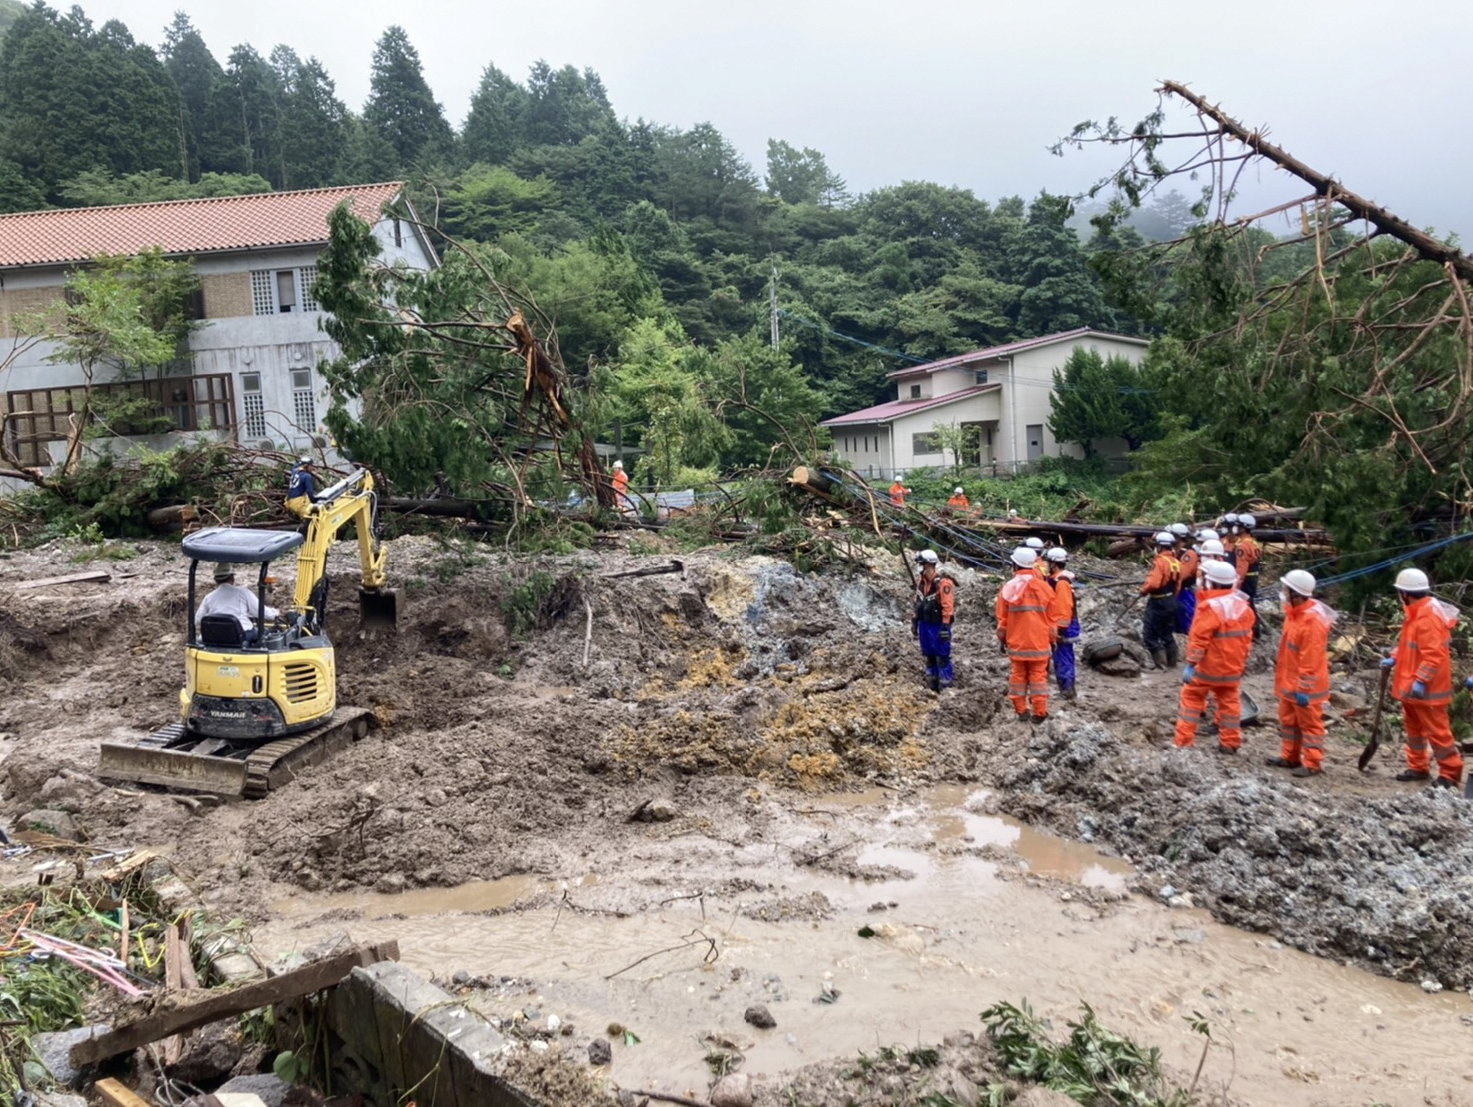 Rescue workers search for missing people at a landslide site caused by heavy rainfall in Unzen